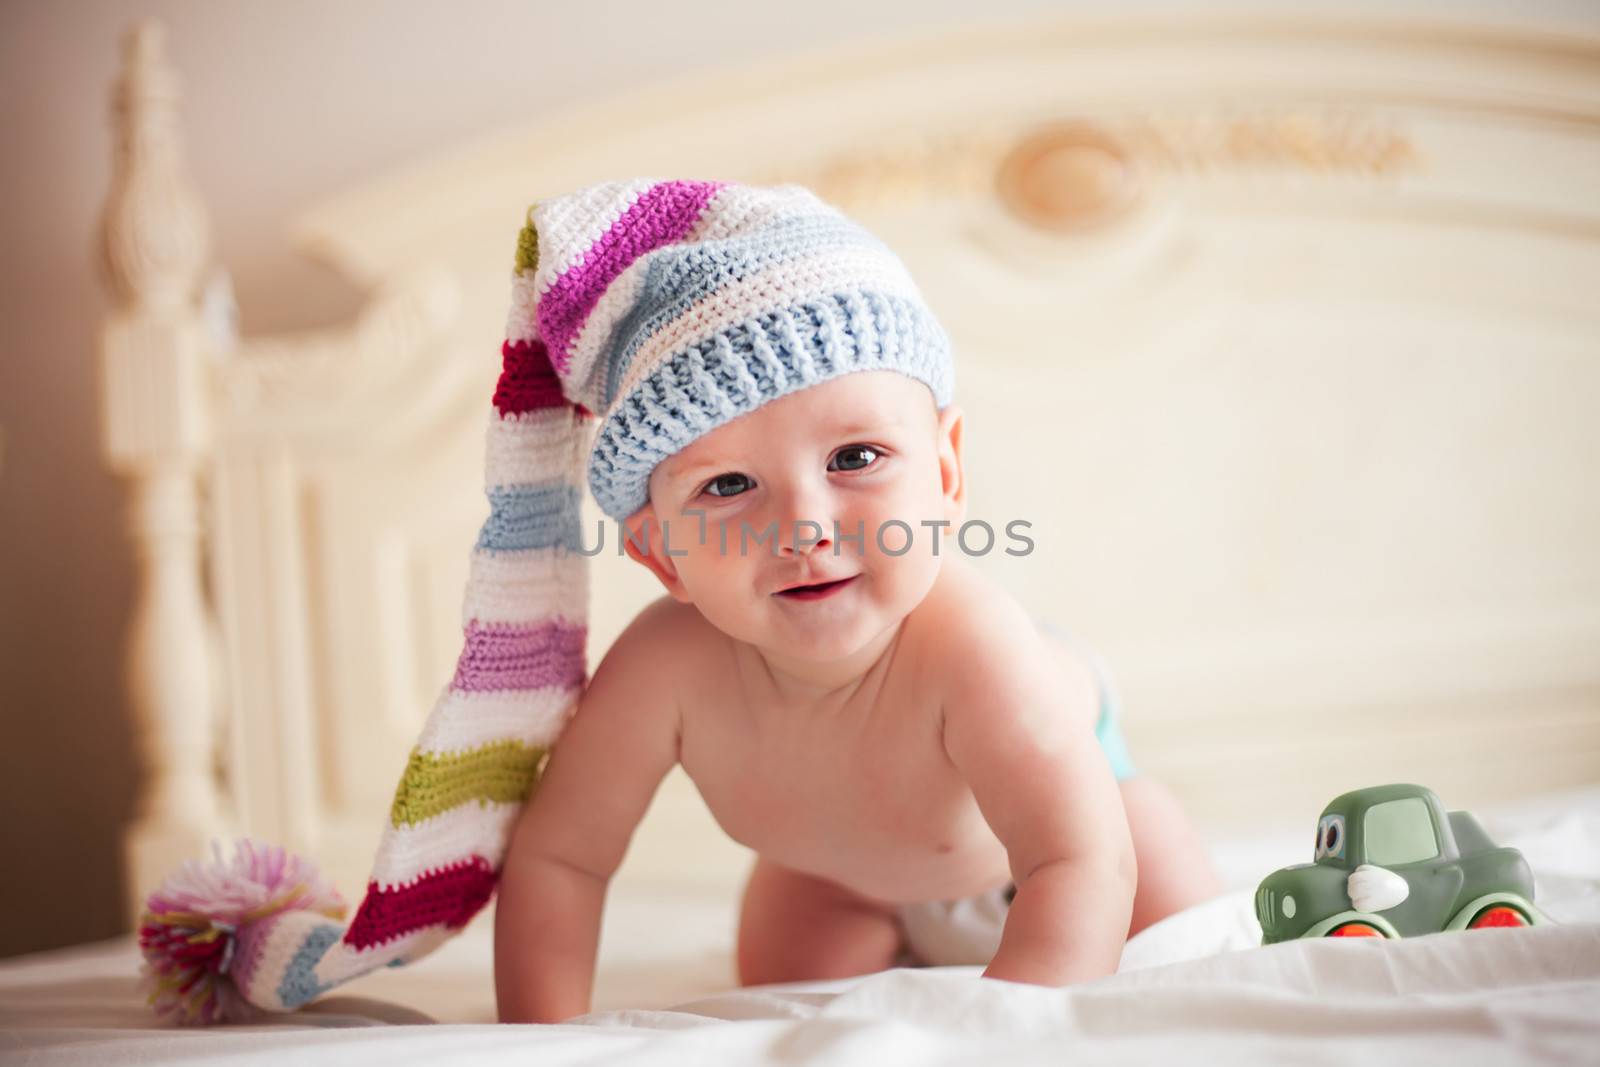 Five-month baby in crochet hat on all fours is smiling